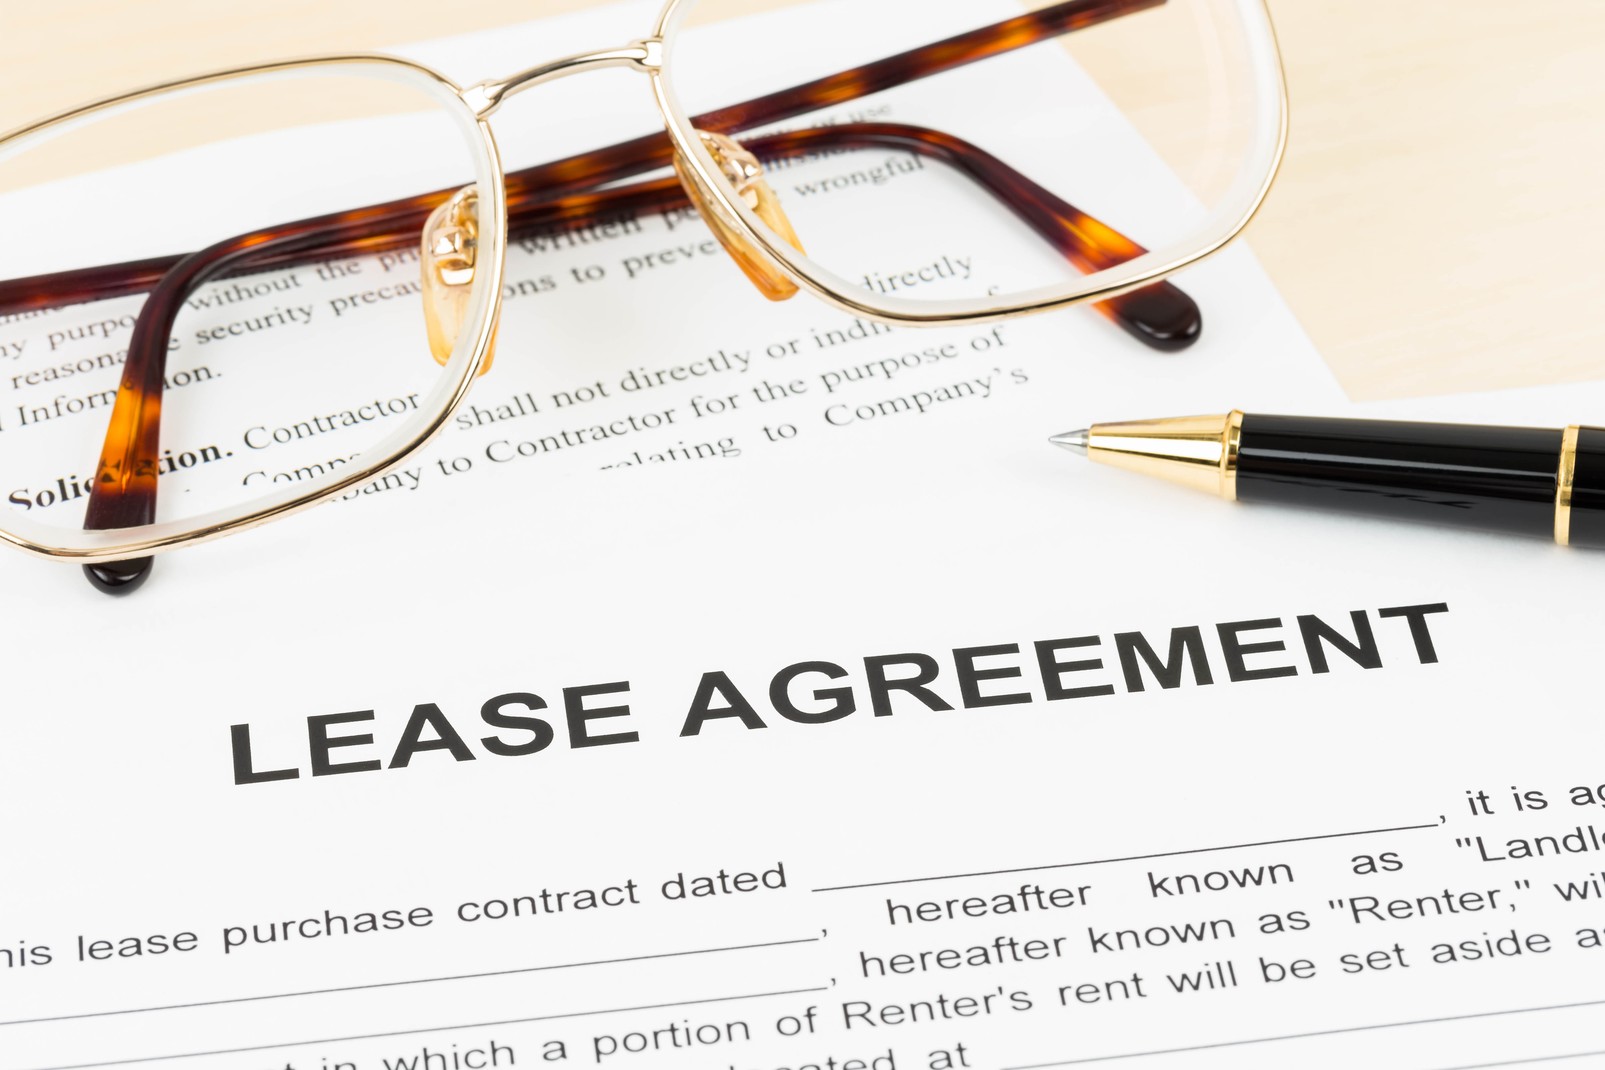 Contract dated. Lease Agreement картинки. Business Agreement document. Sales Contract. Rental Agreement.